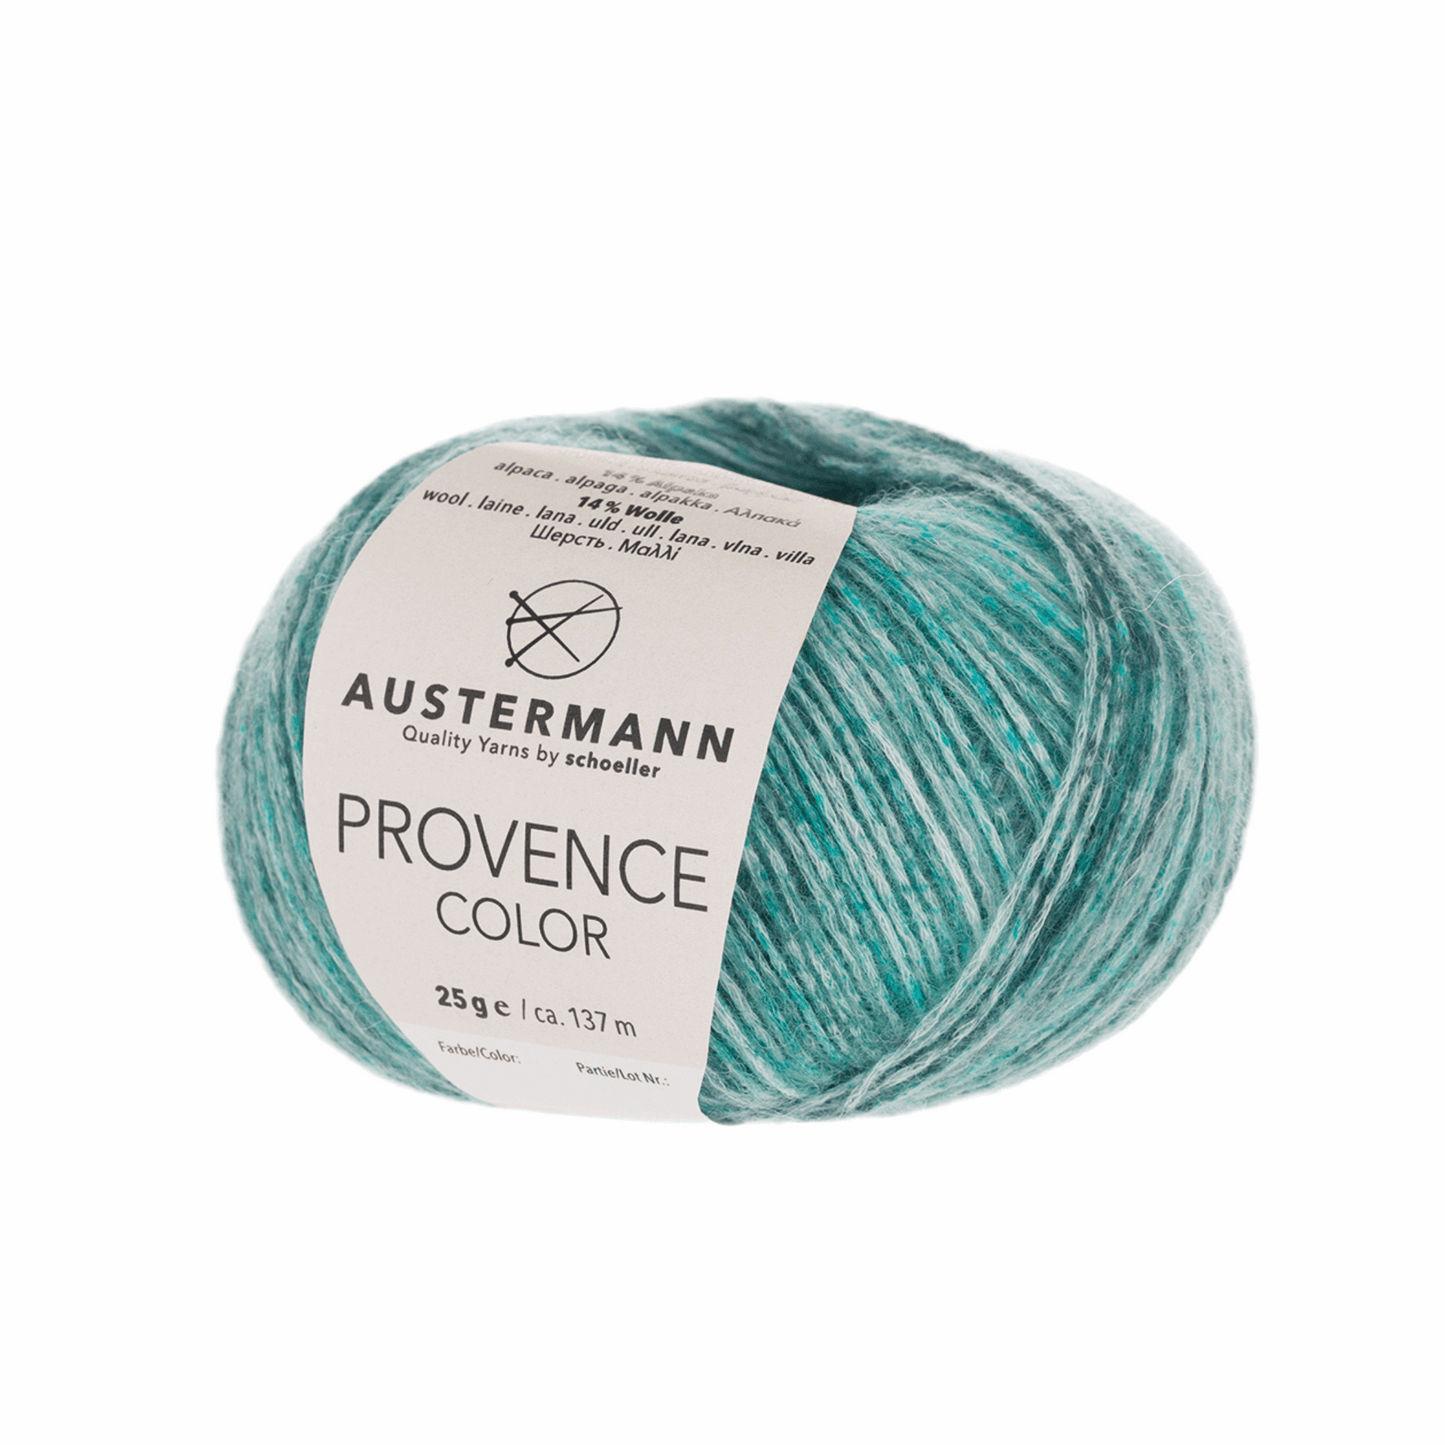 Provence Color 25g, 90304, Farbe 5, türkis